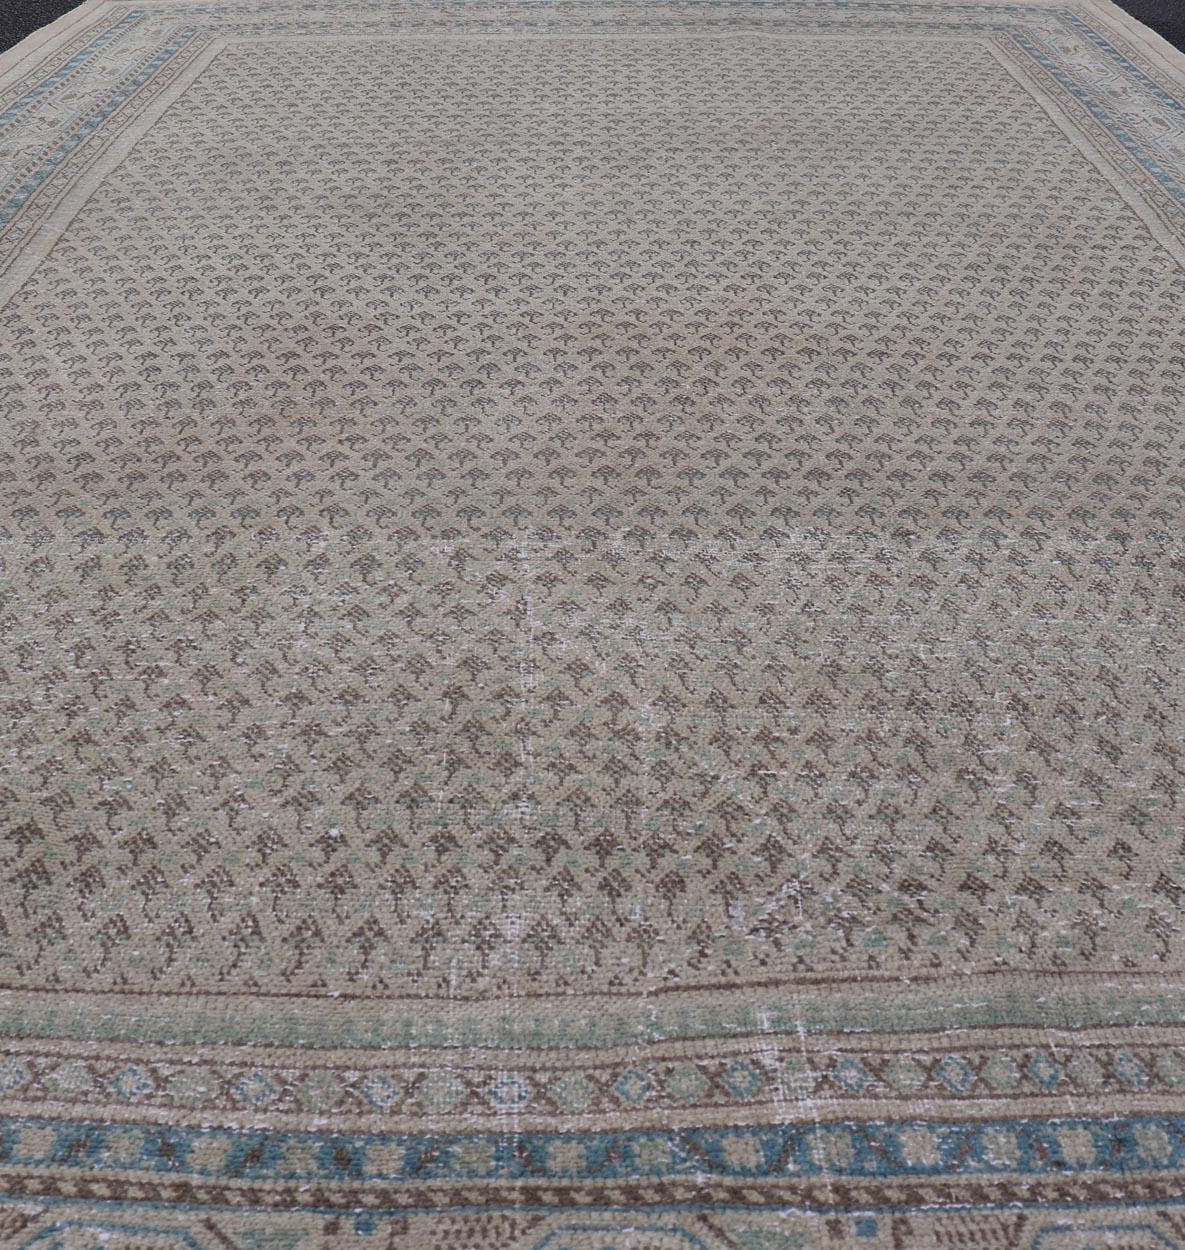 Minimalist Design Vintage Persian Tabriz Rug with All-Over Small Scale Design. Keivan Woven Arts / rug MSE-1553, country of origin / type: Iran/ Tabriz, circa 1960.
Measures: 6'6 x 10'7 
This Tabriz rug features a relatively intricate and detailed